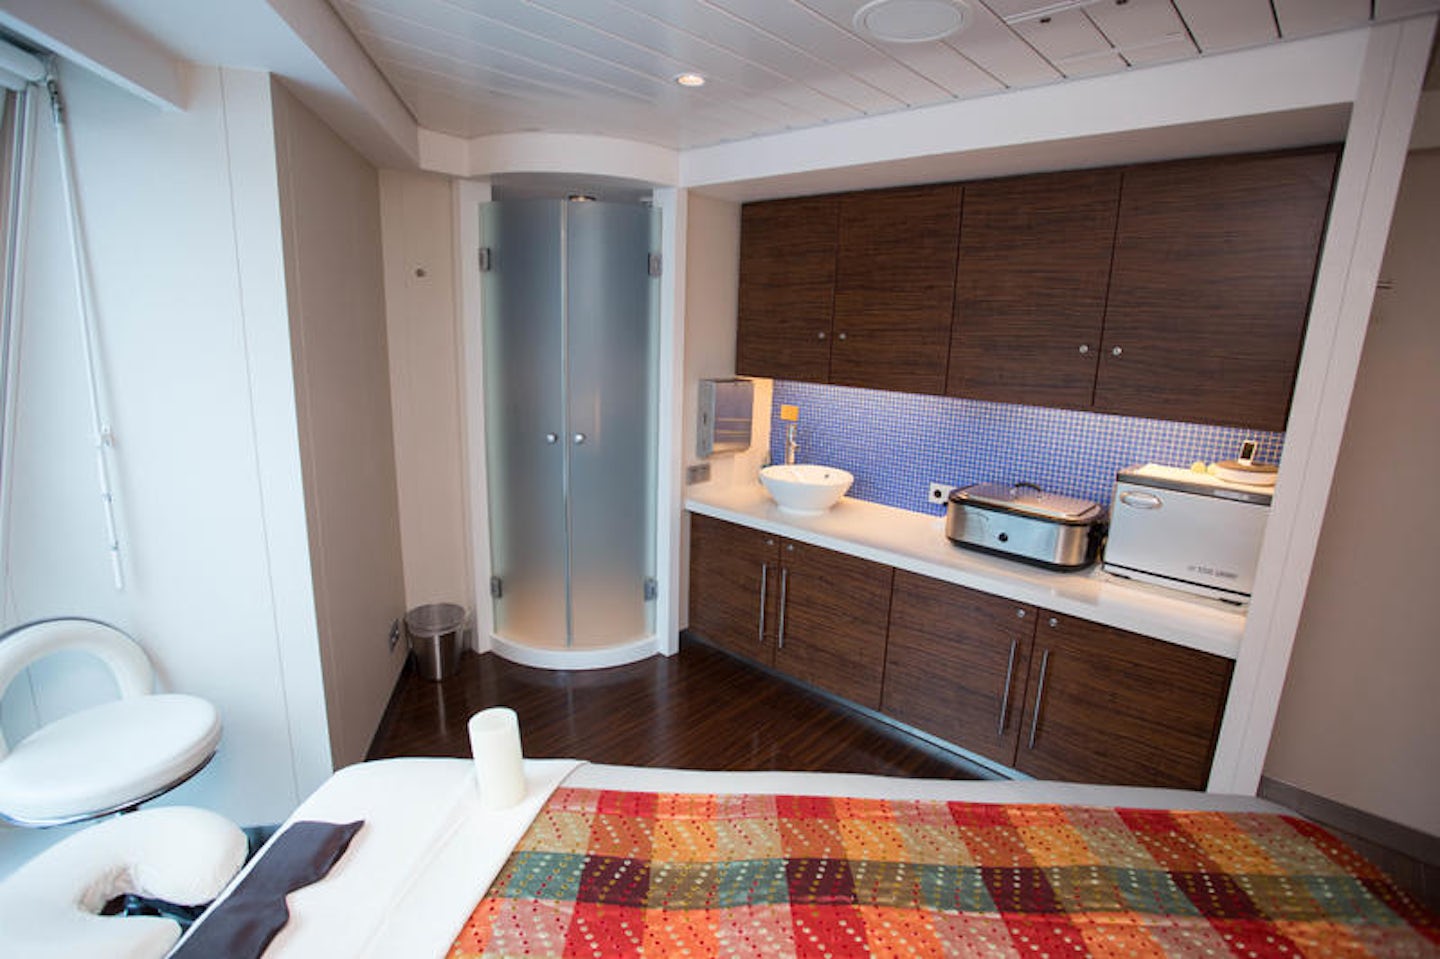 Canyon Ranch SpaClub on Celebrity Solstice